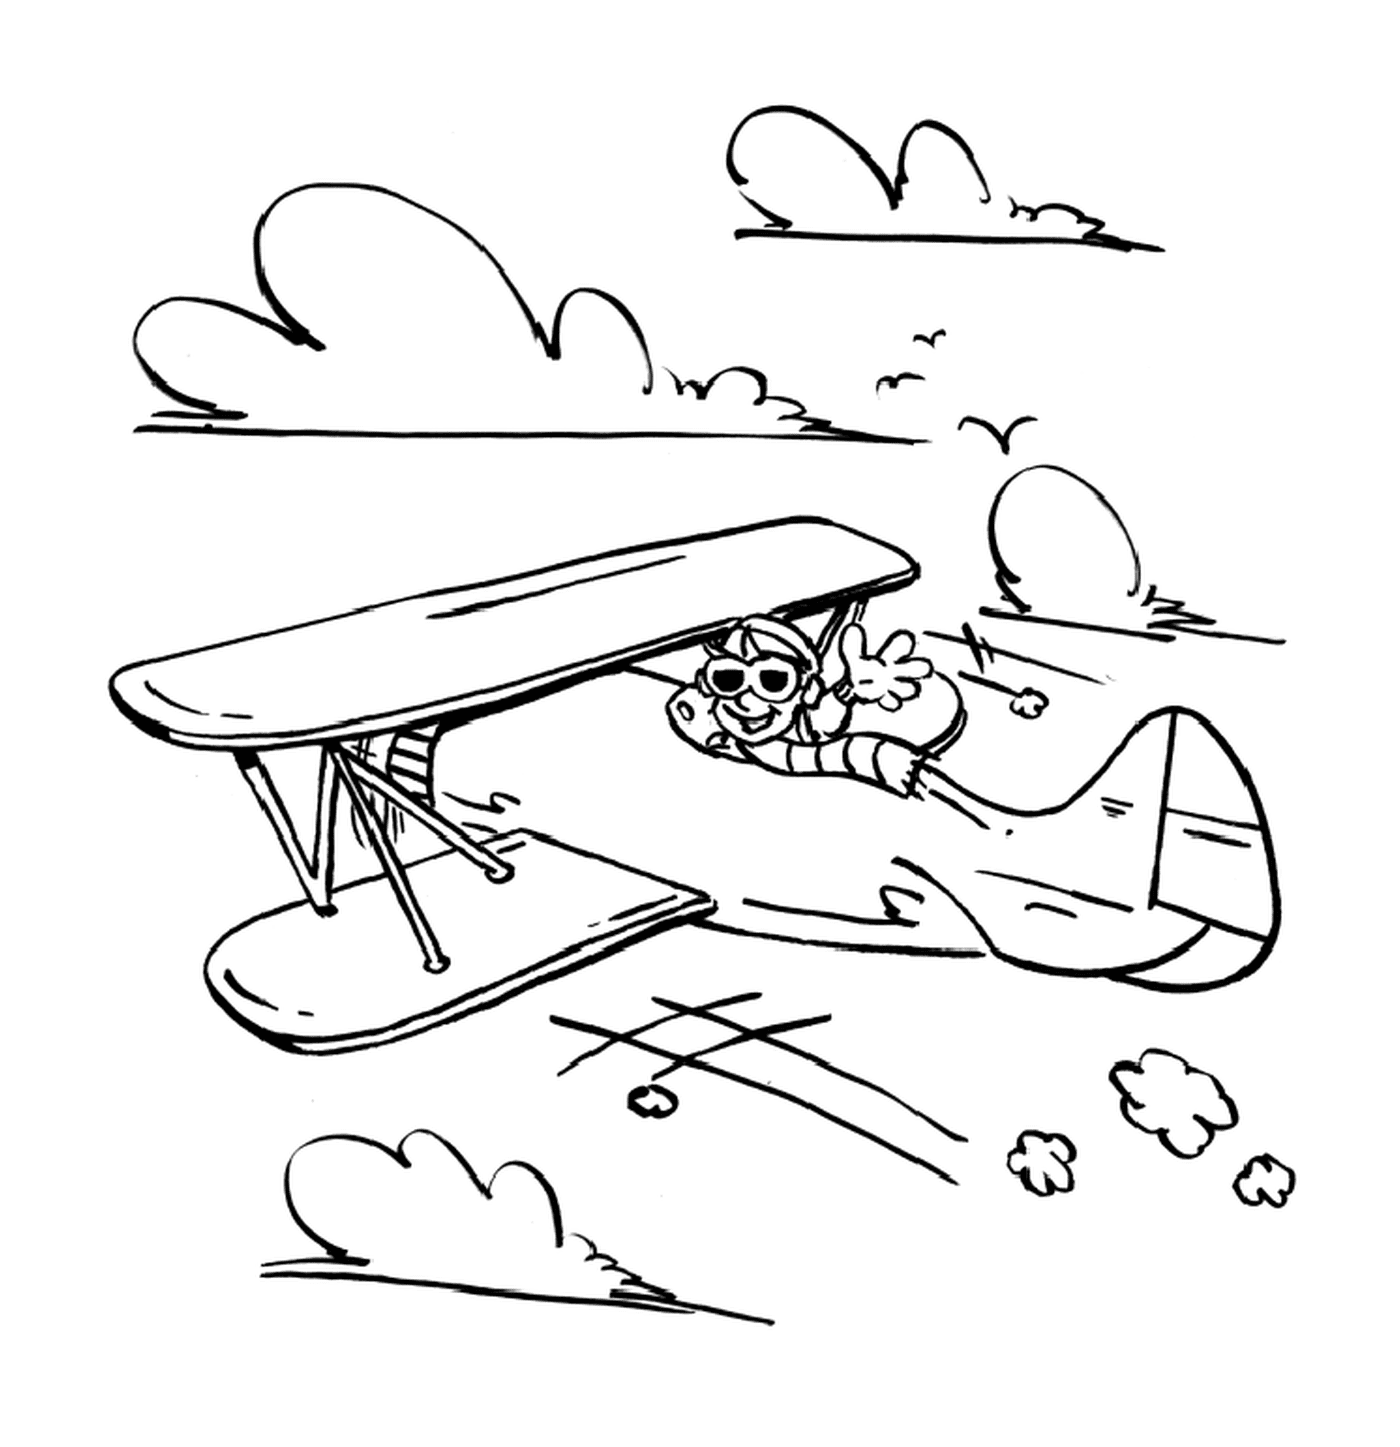  A small plane with a pilot 